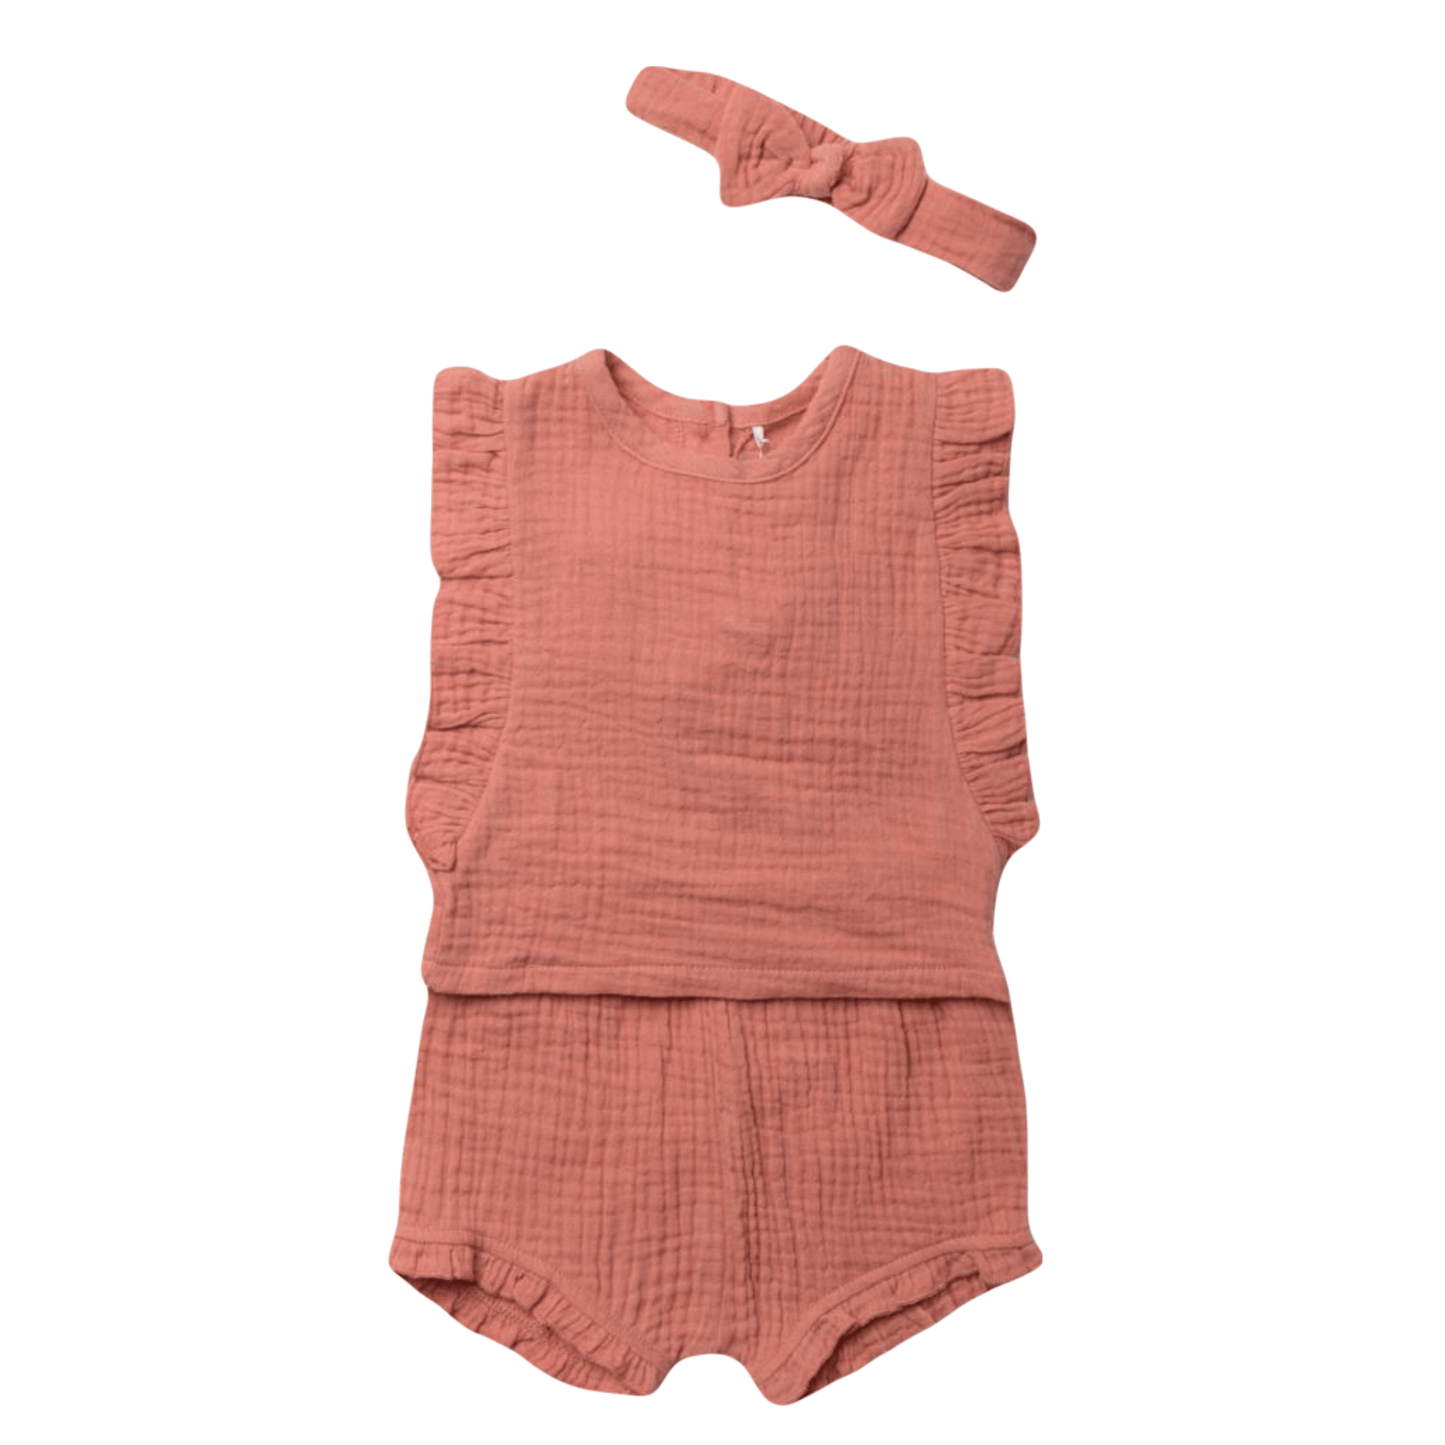 Baby Girls Muslin 3 Piece Outfit | Oscar & Me | Baby & Children’s Clothing & Accessories